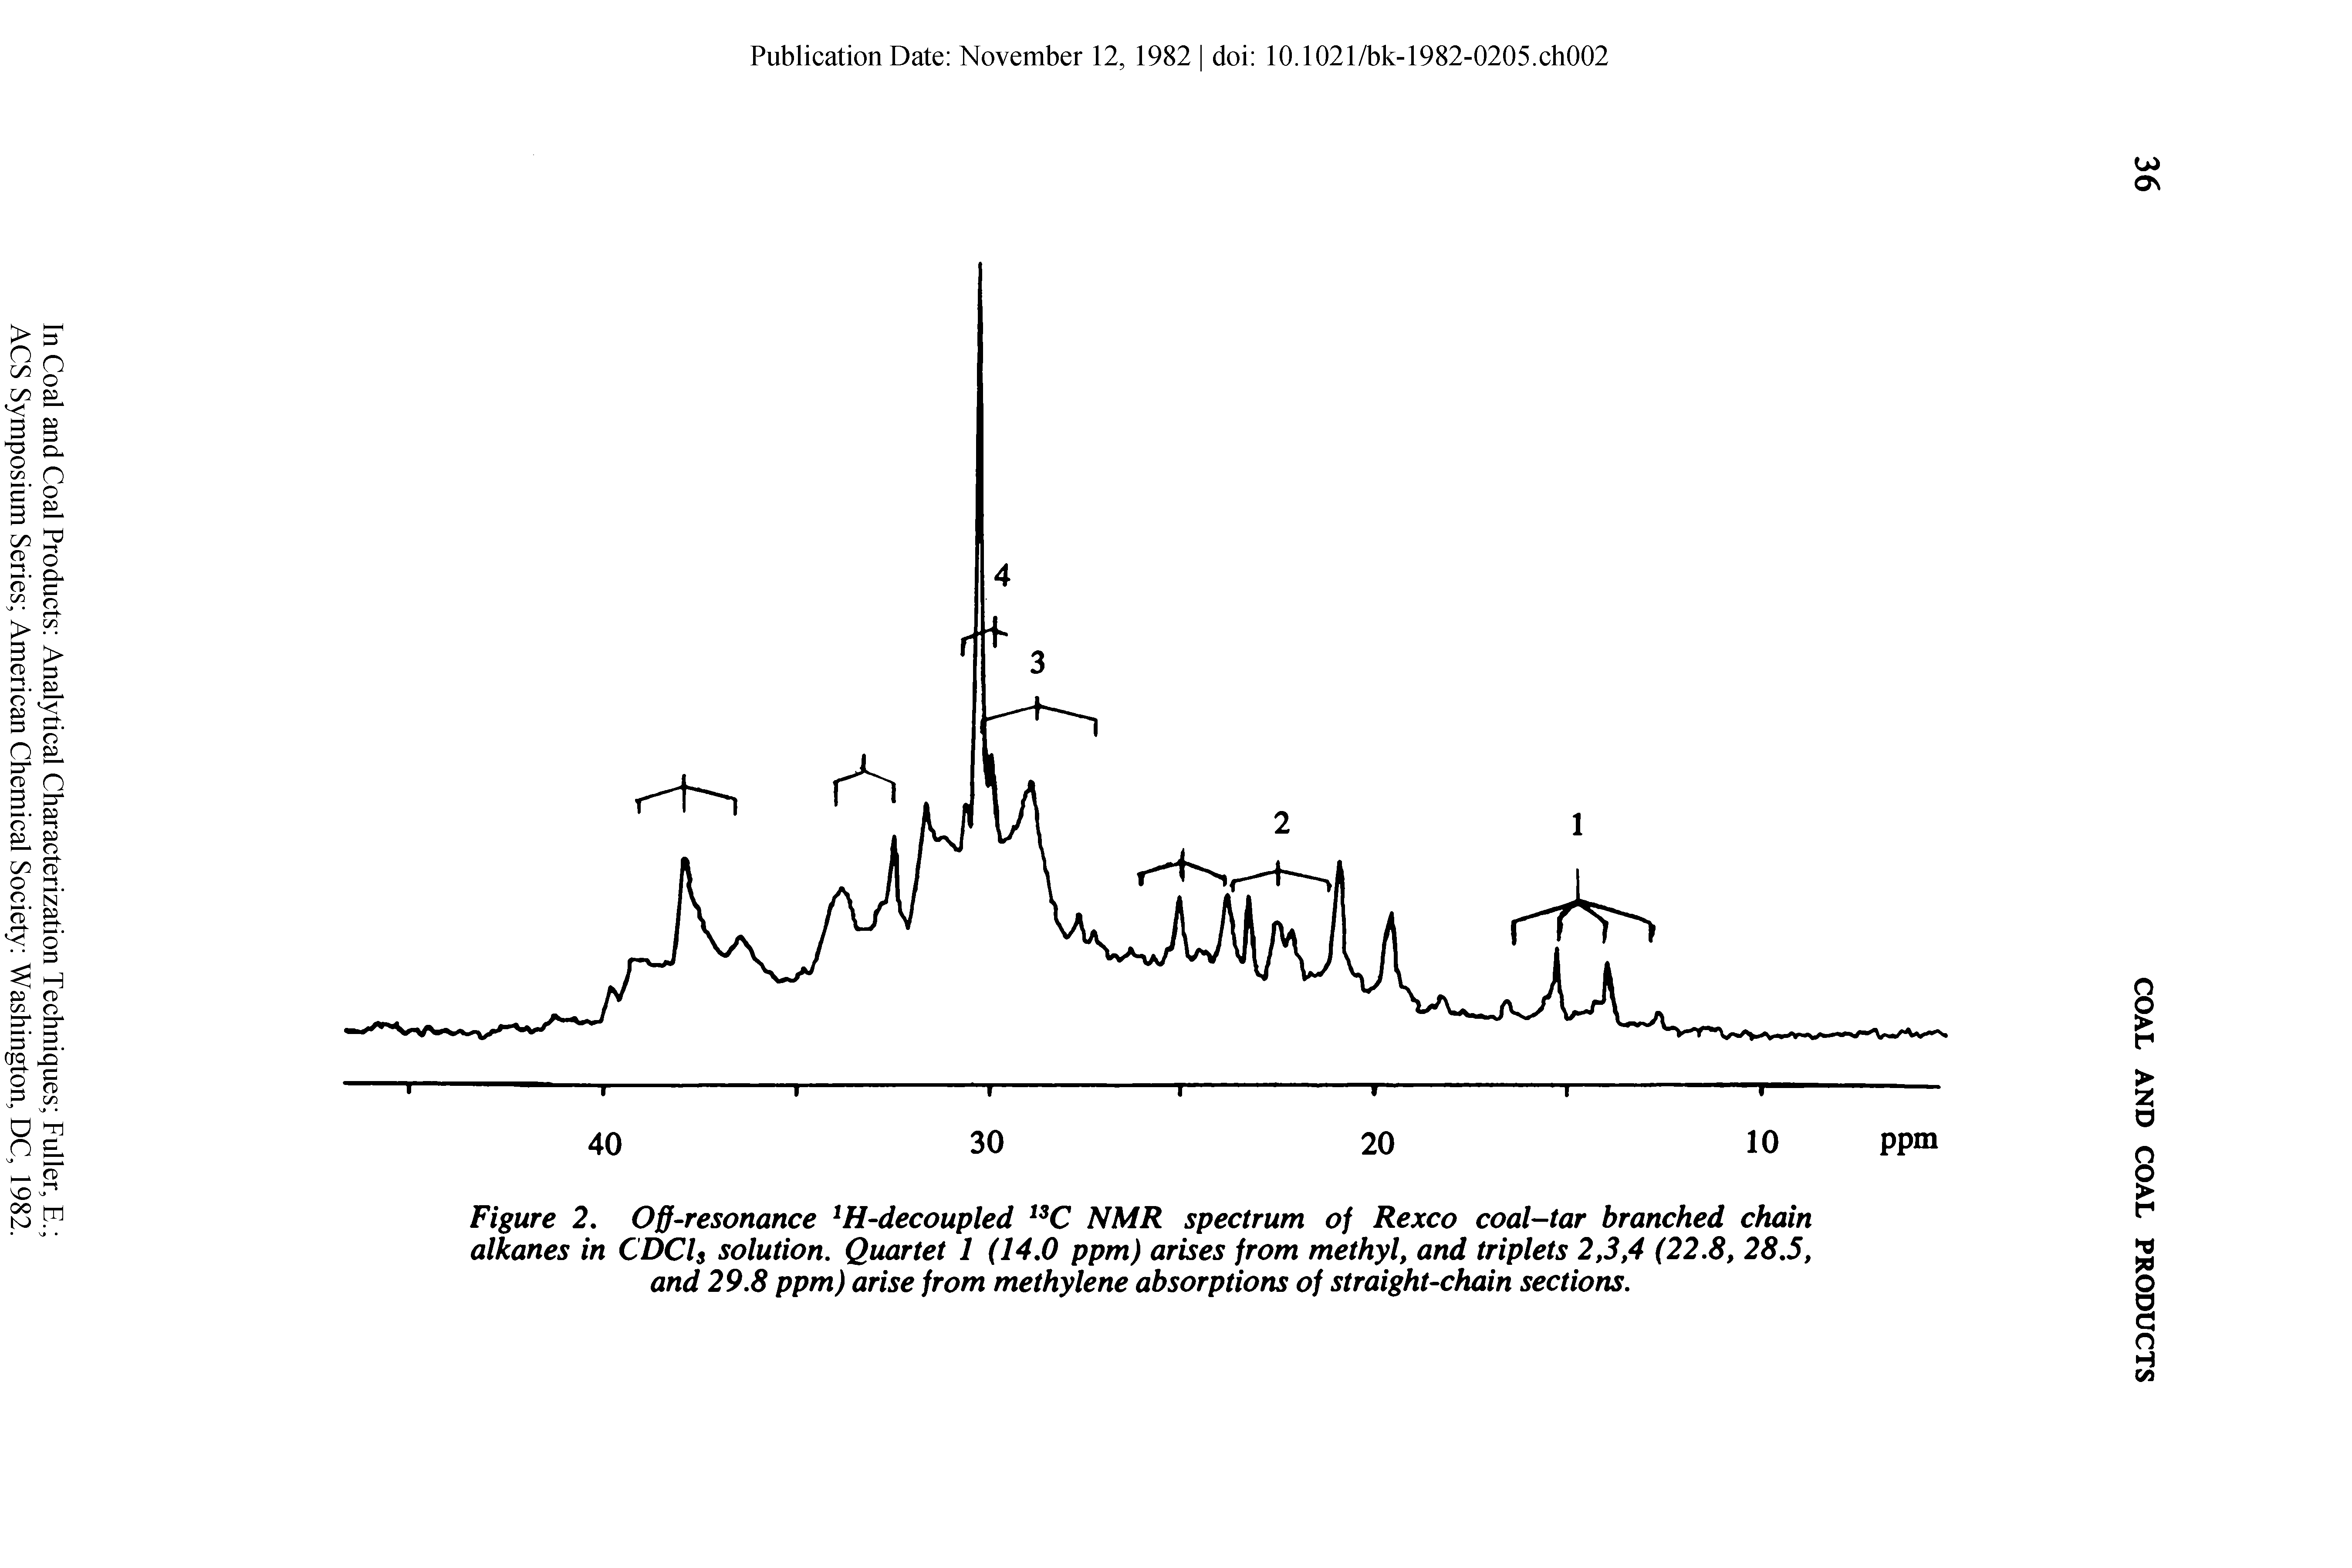 Figure 2, Off-resonance H-decoupled NMR spectrum of Rexco coal-tar branched chain alkanes in CDCU solution. Quartet 1 (14,0 ppm) arises from methyl, and triplets 2,3,4 (22.8, 28,5, and 29.8 ppm) arise from methylene absorptions of straight-chain sections.